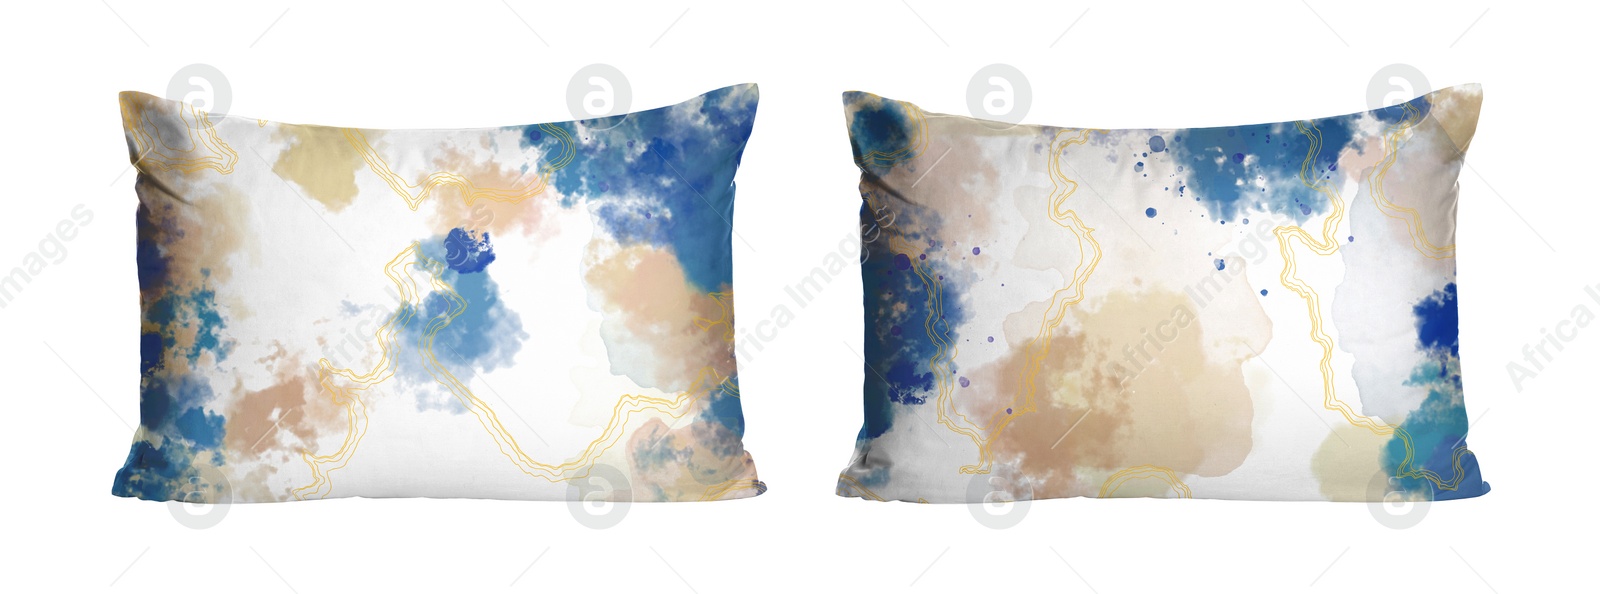 Image of Soft pillows with stylish prints isolated on white